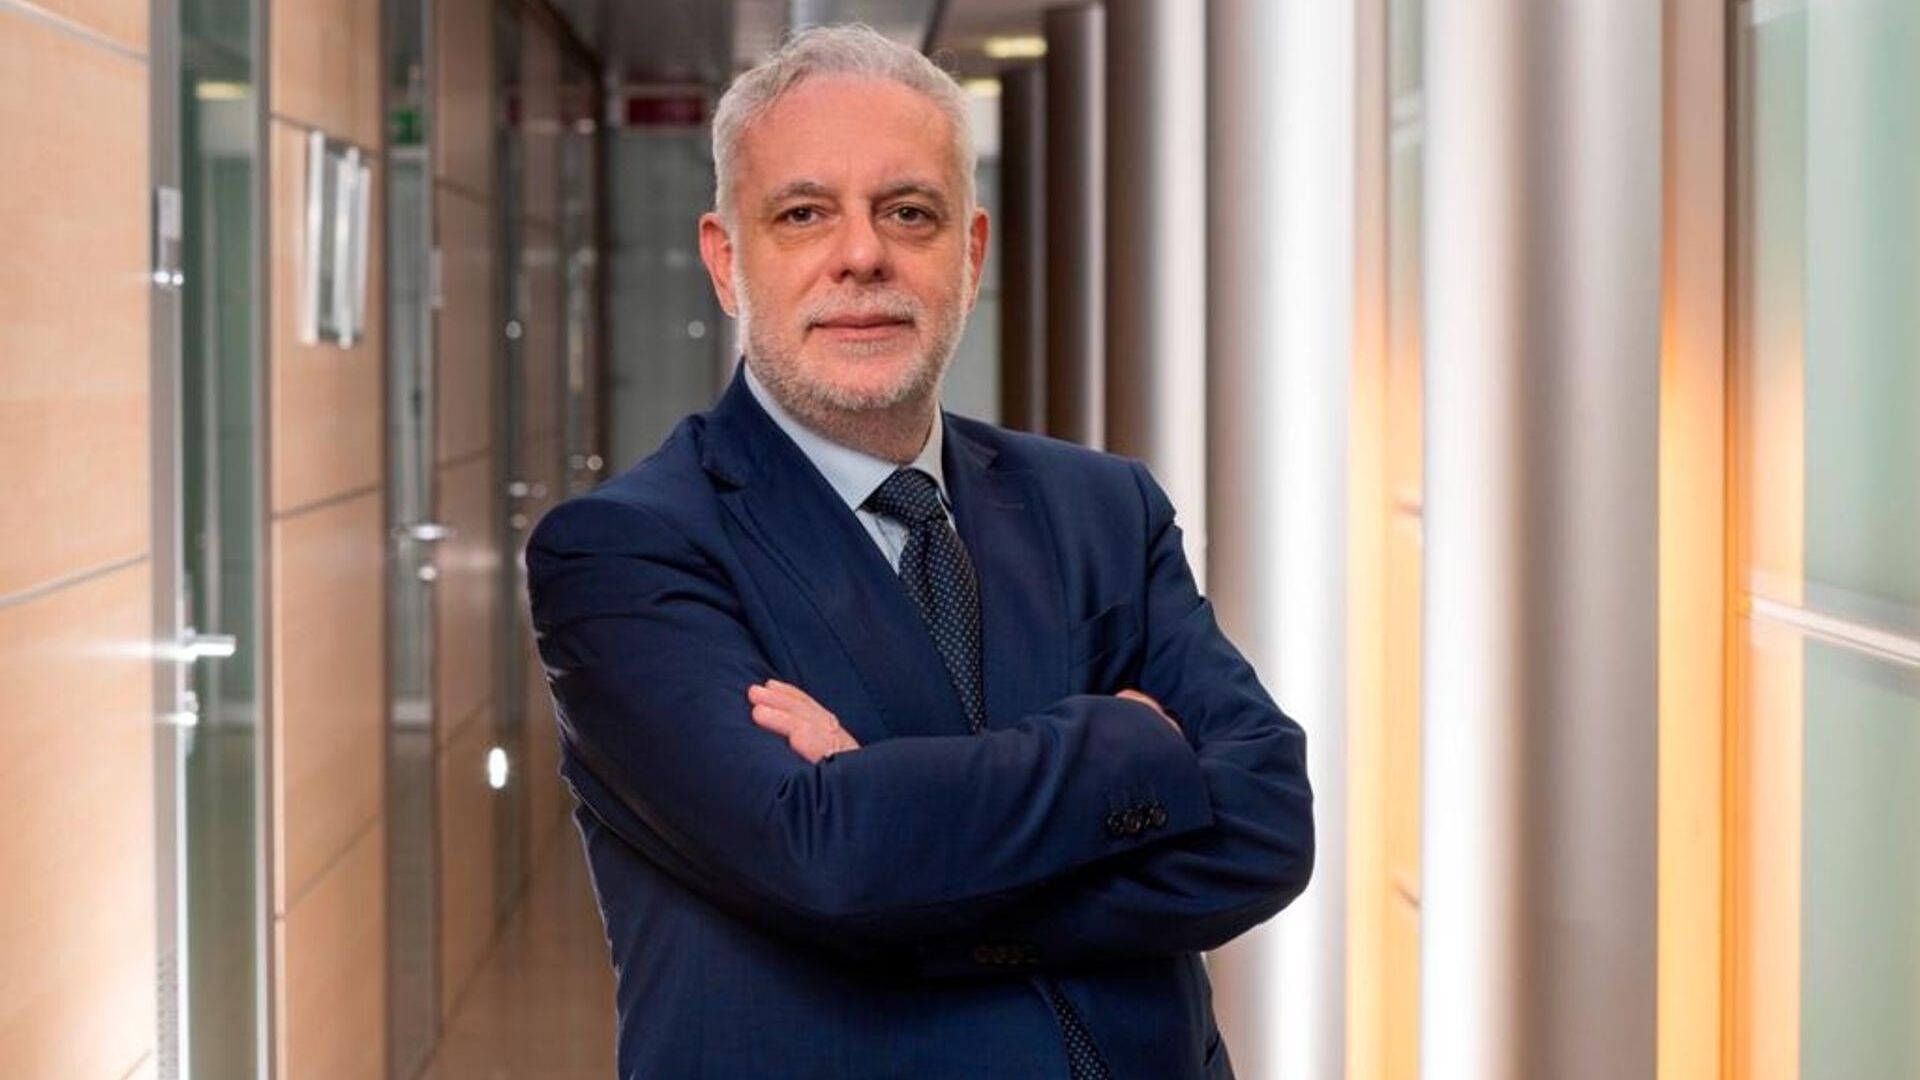 Andrea Gibelli is President of the FNM Group (formerly FerrovieNord)